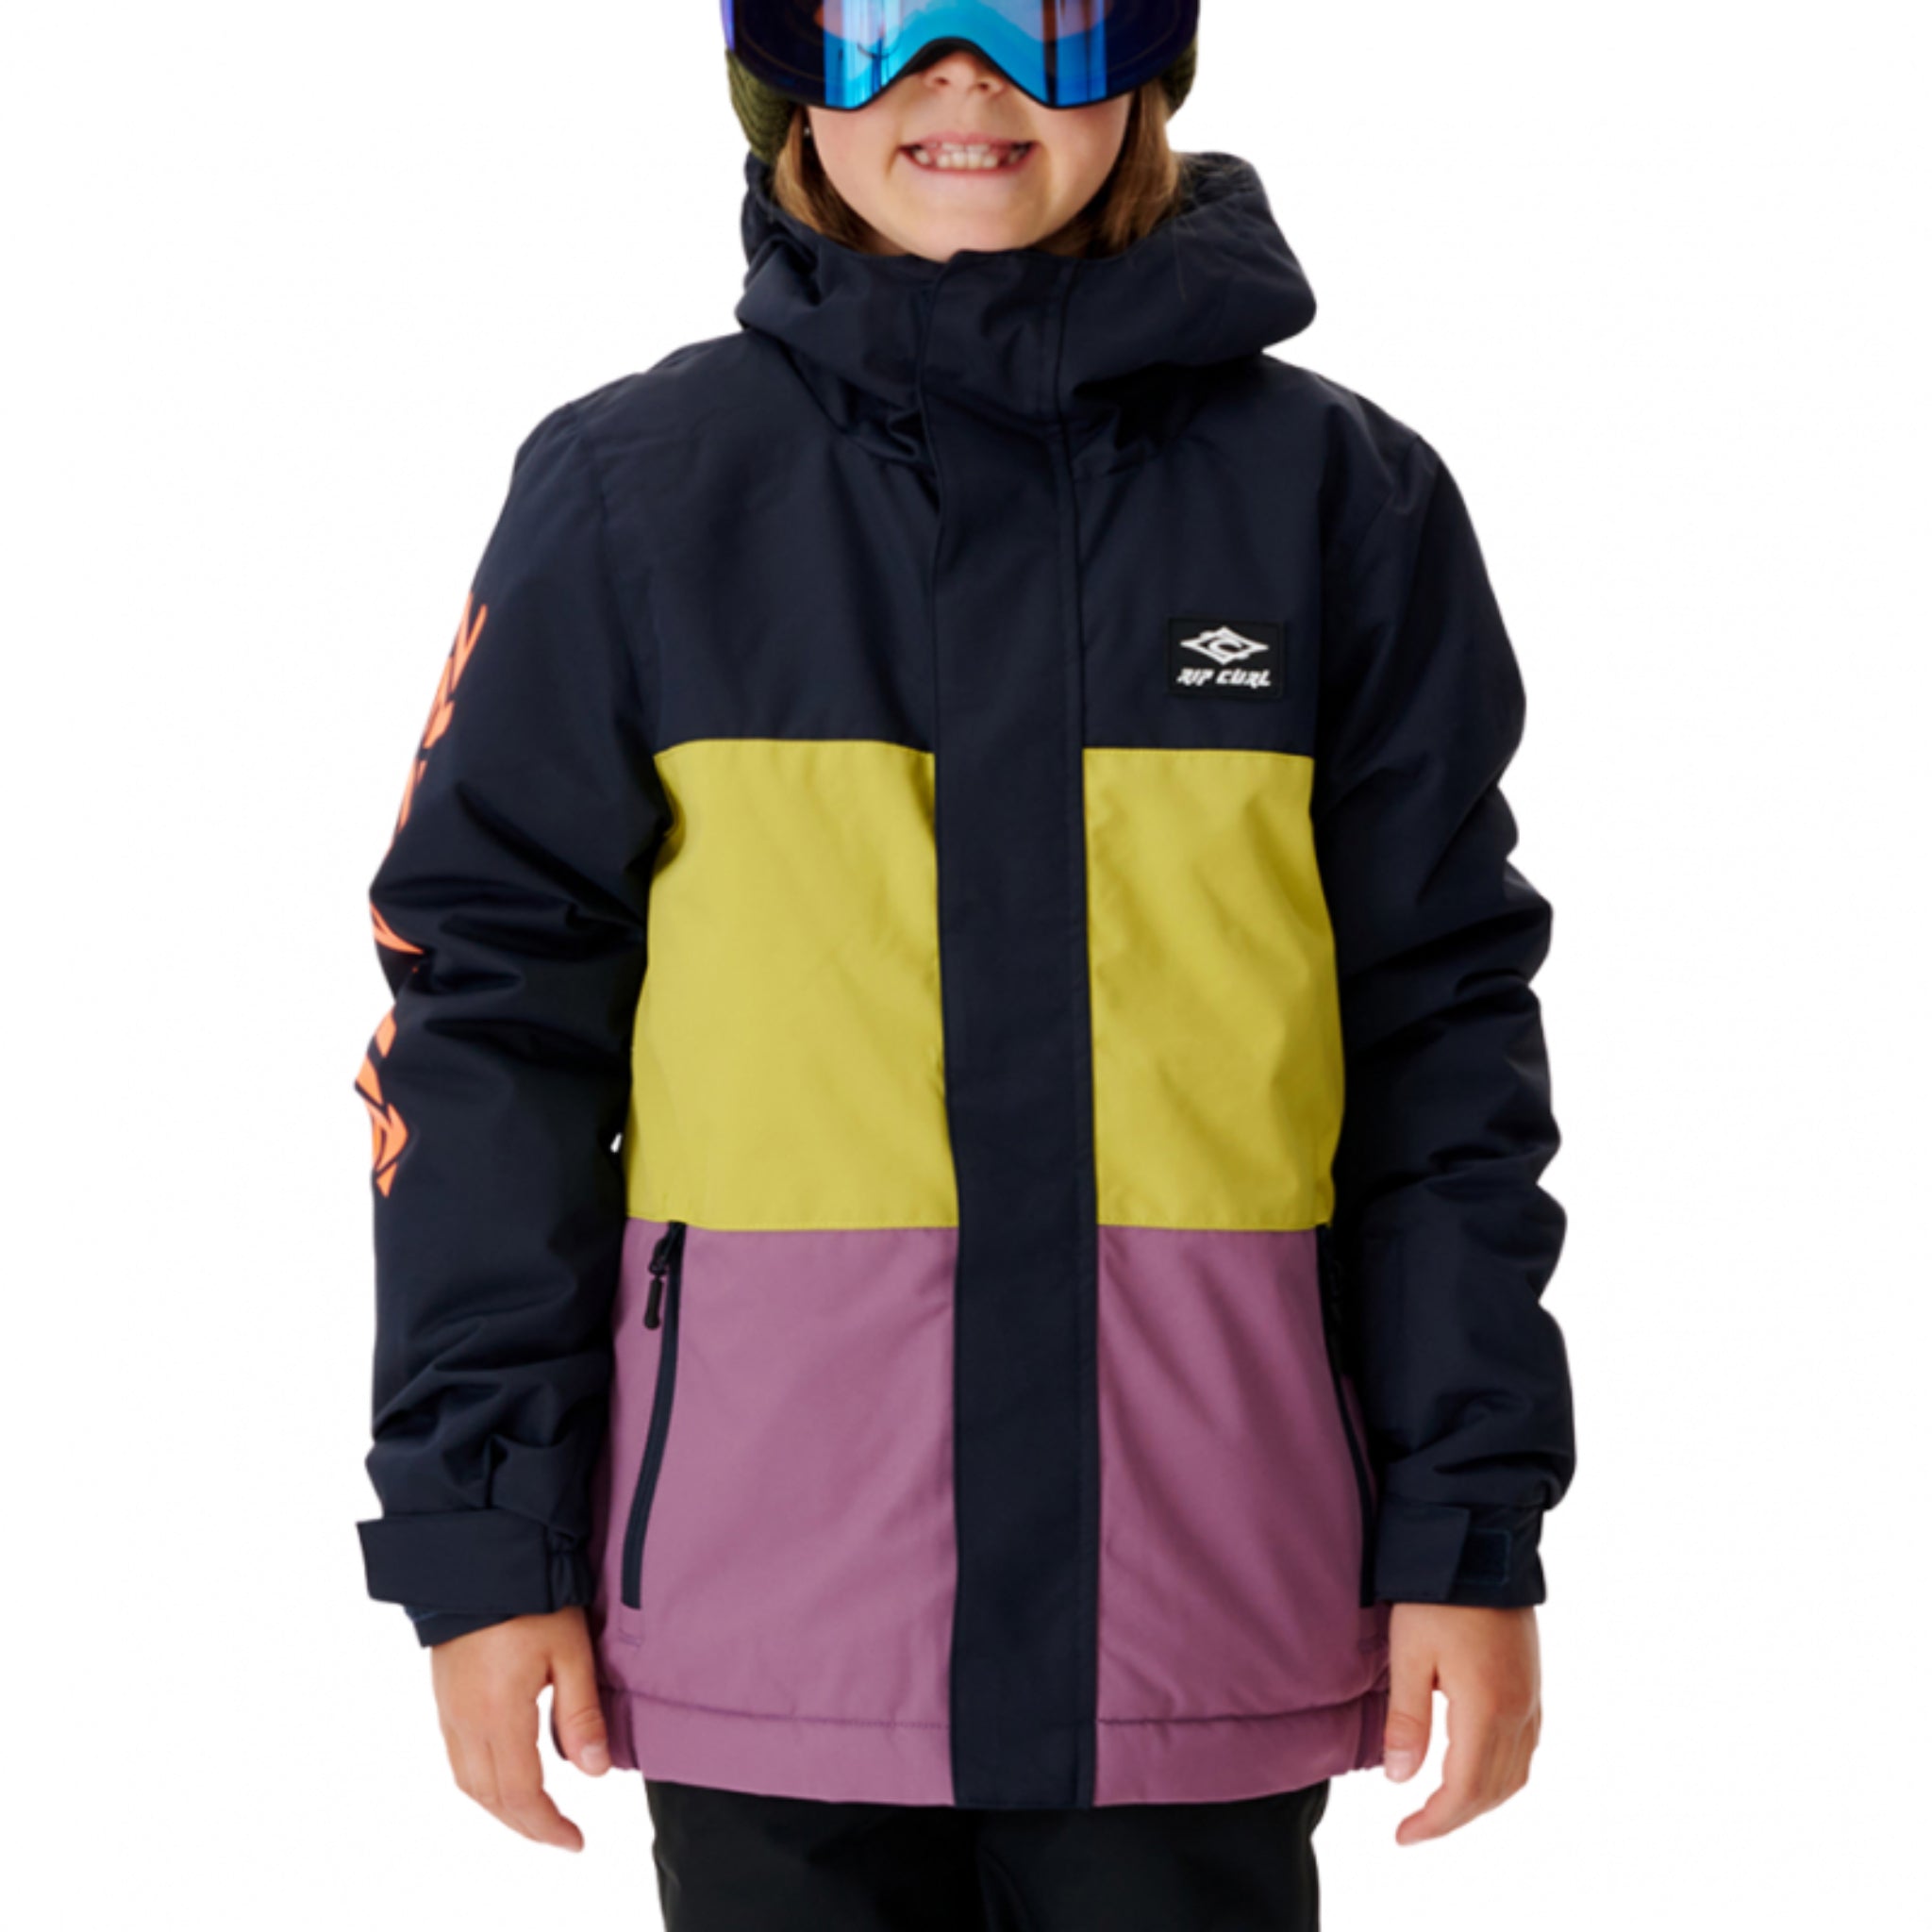 Rip Curl Kids Olly Snow Jacket